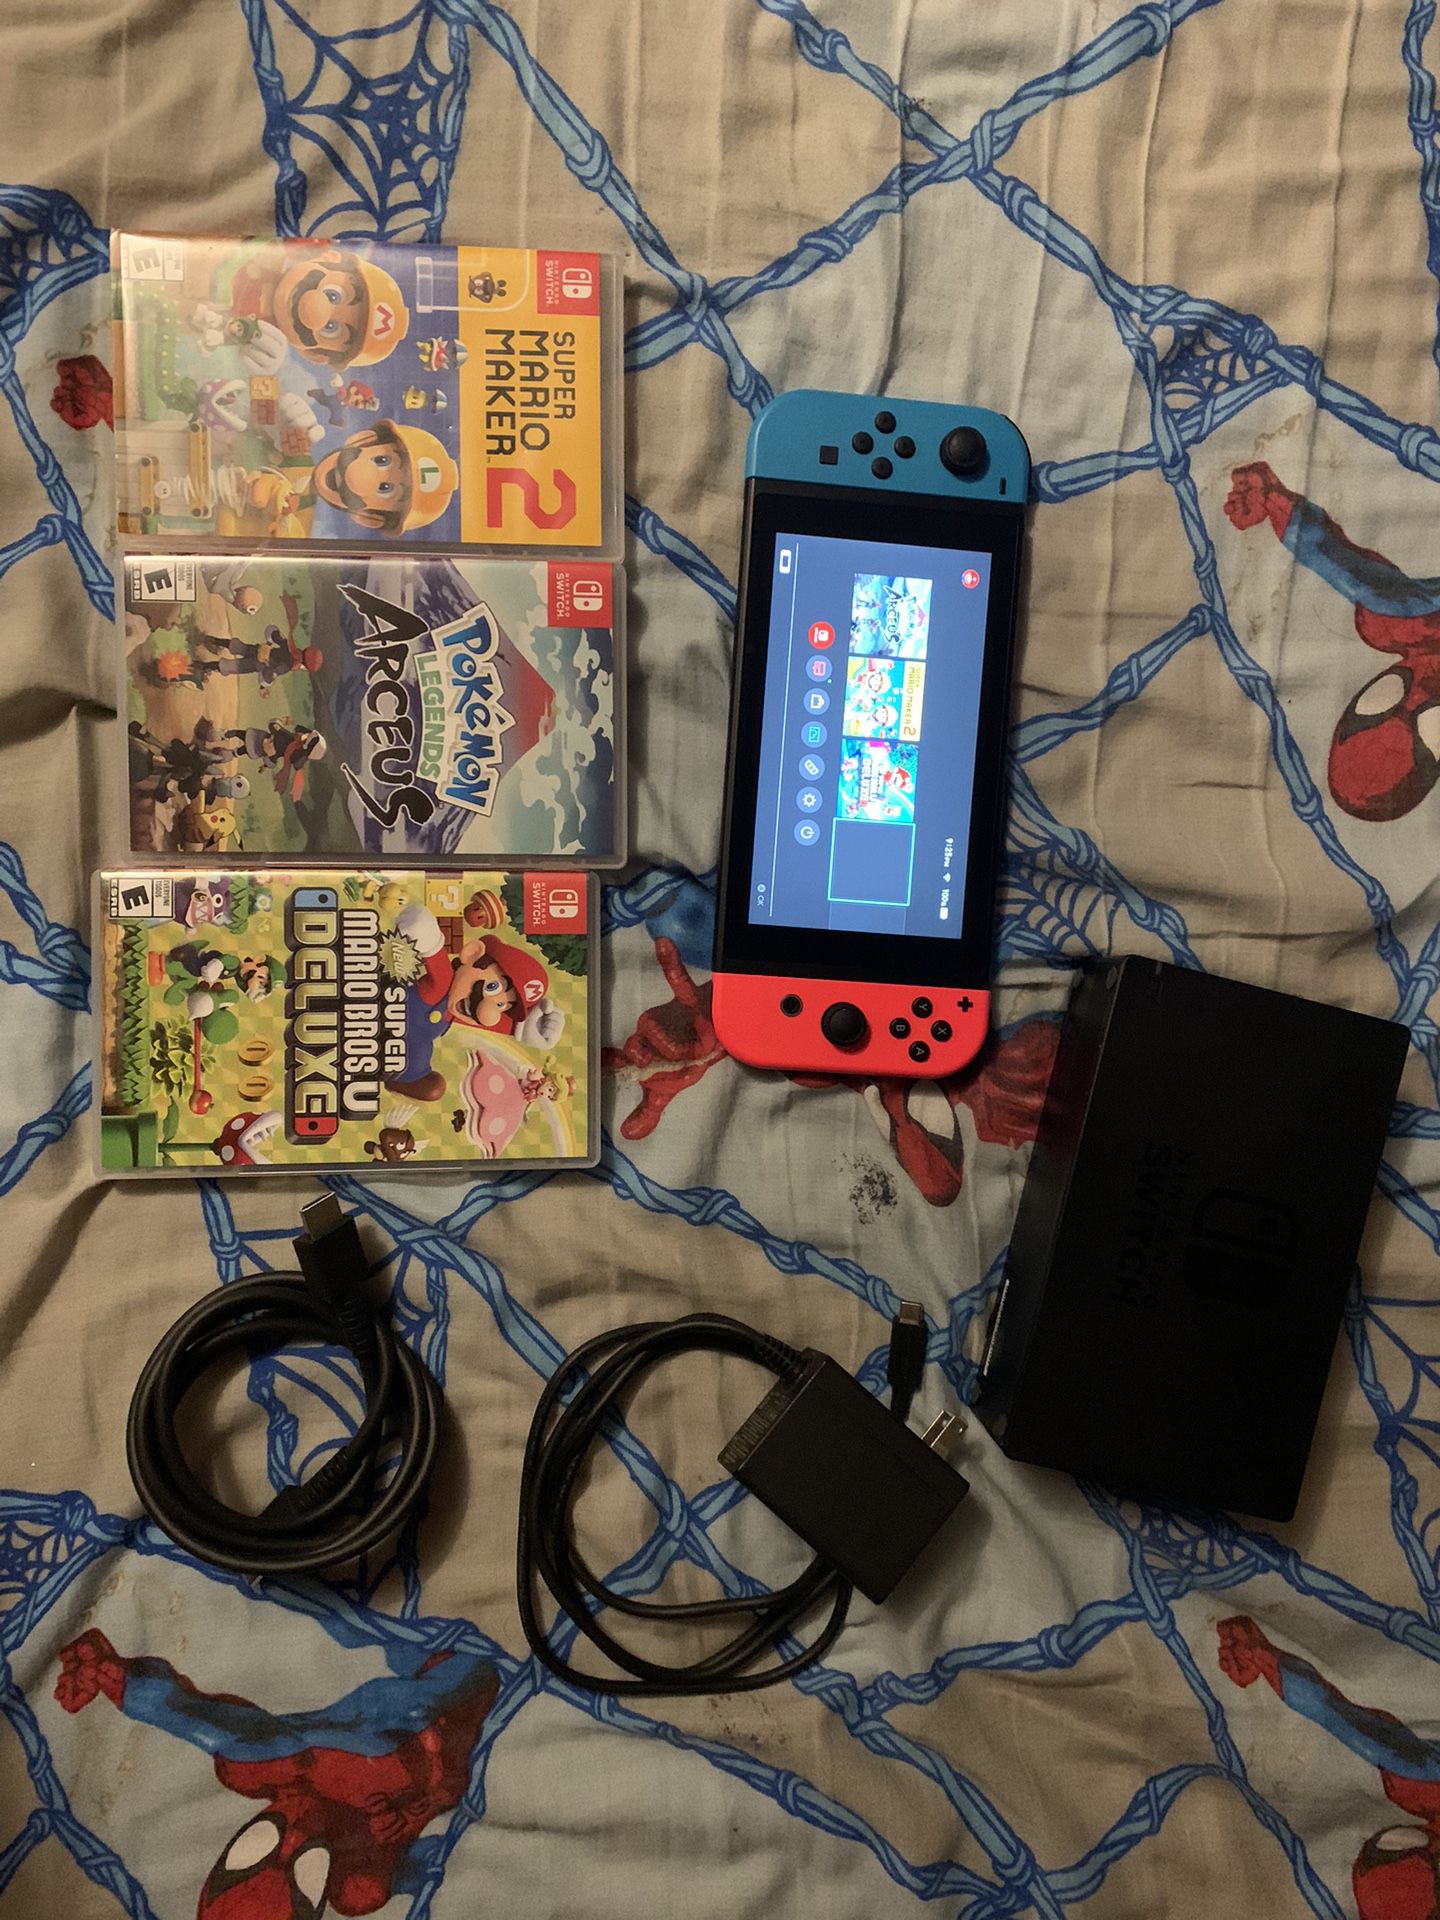 Nintendo Switch and Games